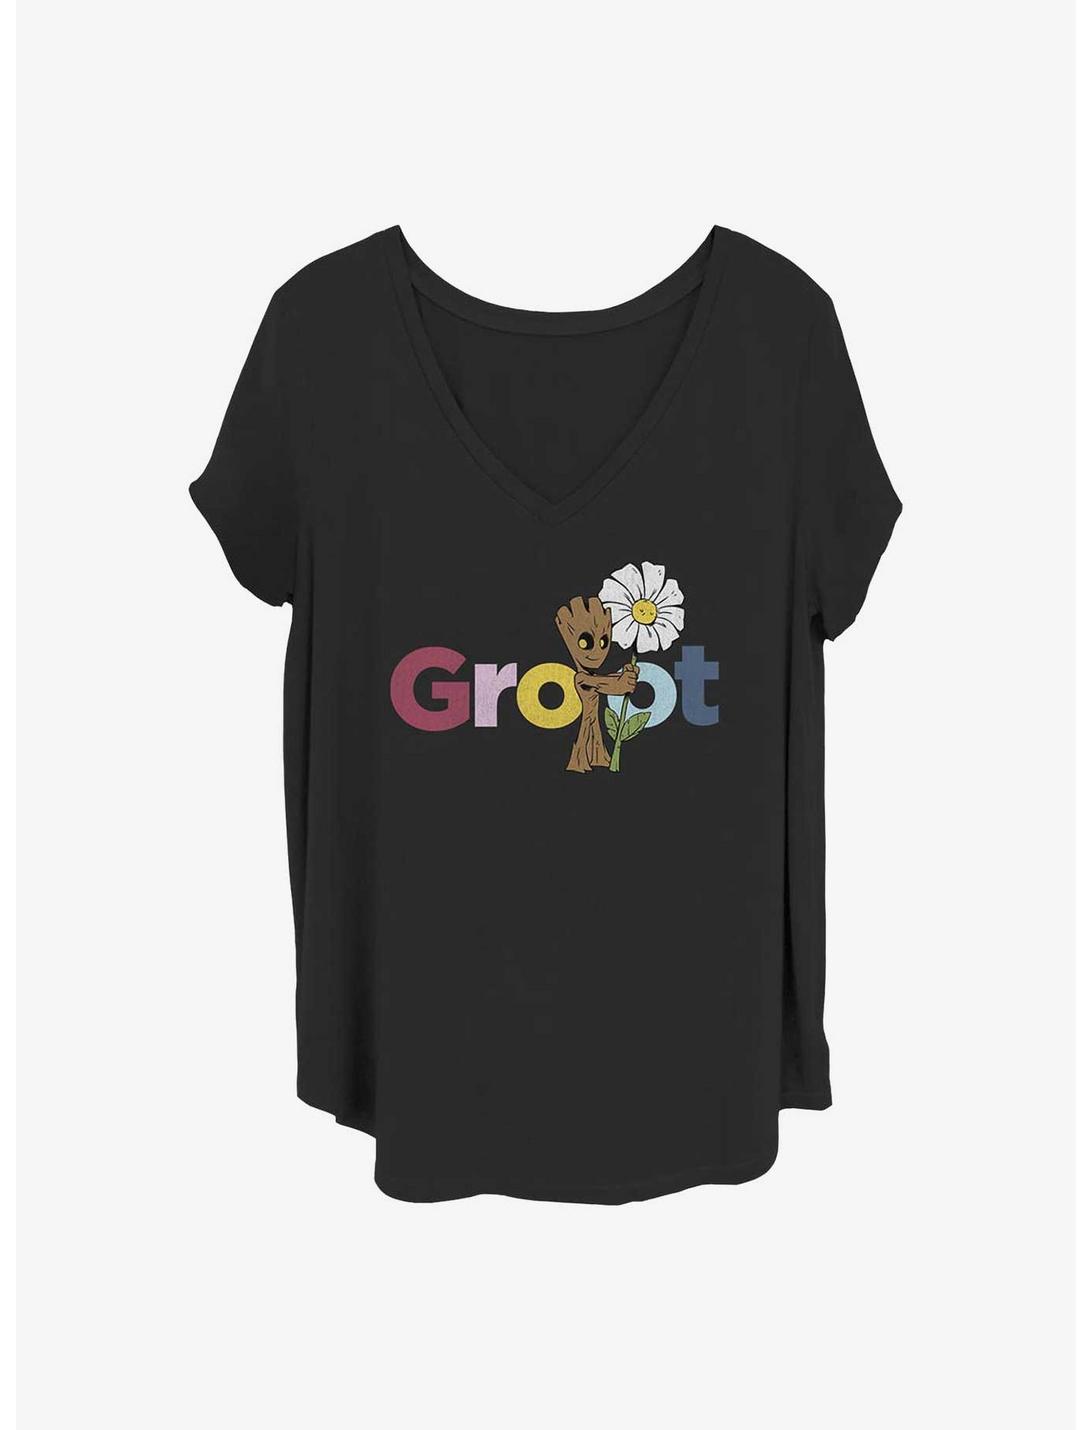 Marvel Guardians of the Galaxy Groot Girls T-Shirt Plus Size, BLACK, hi-res